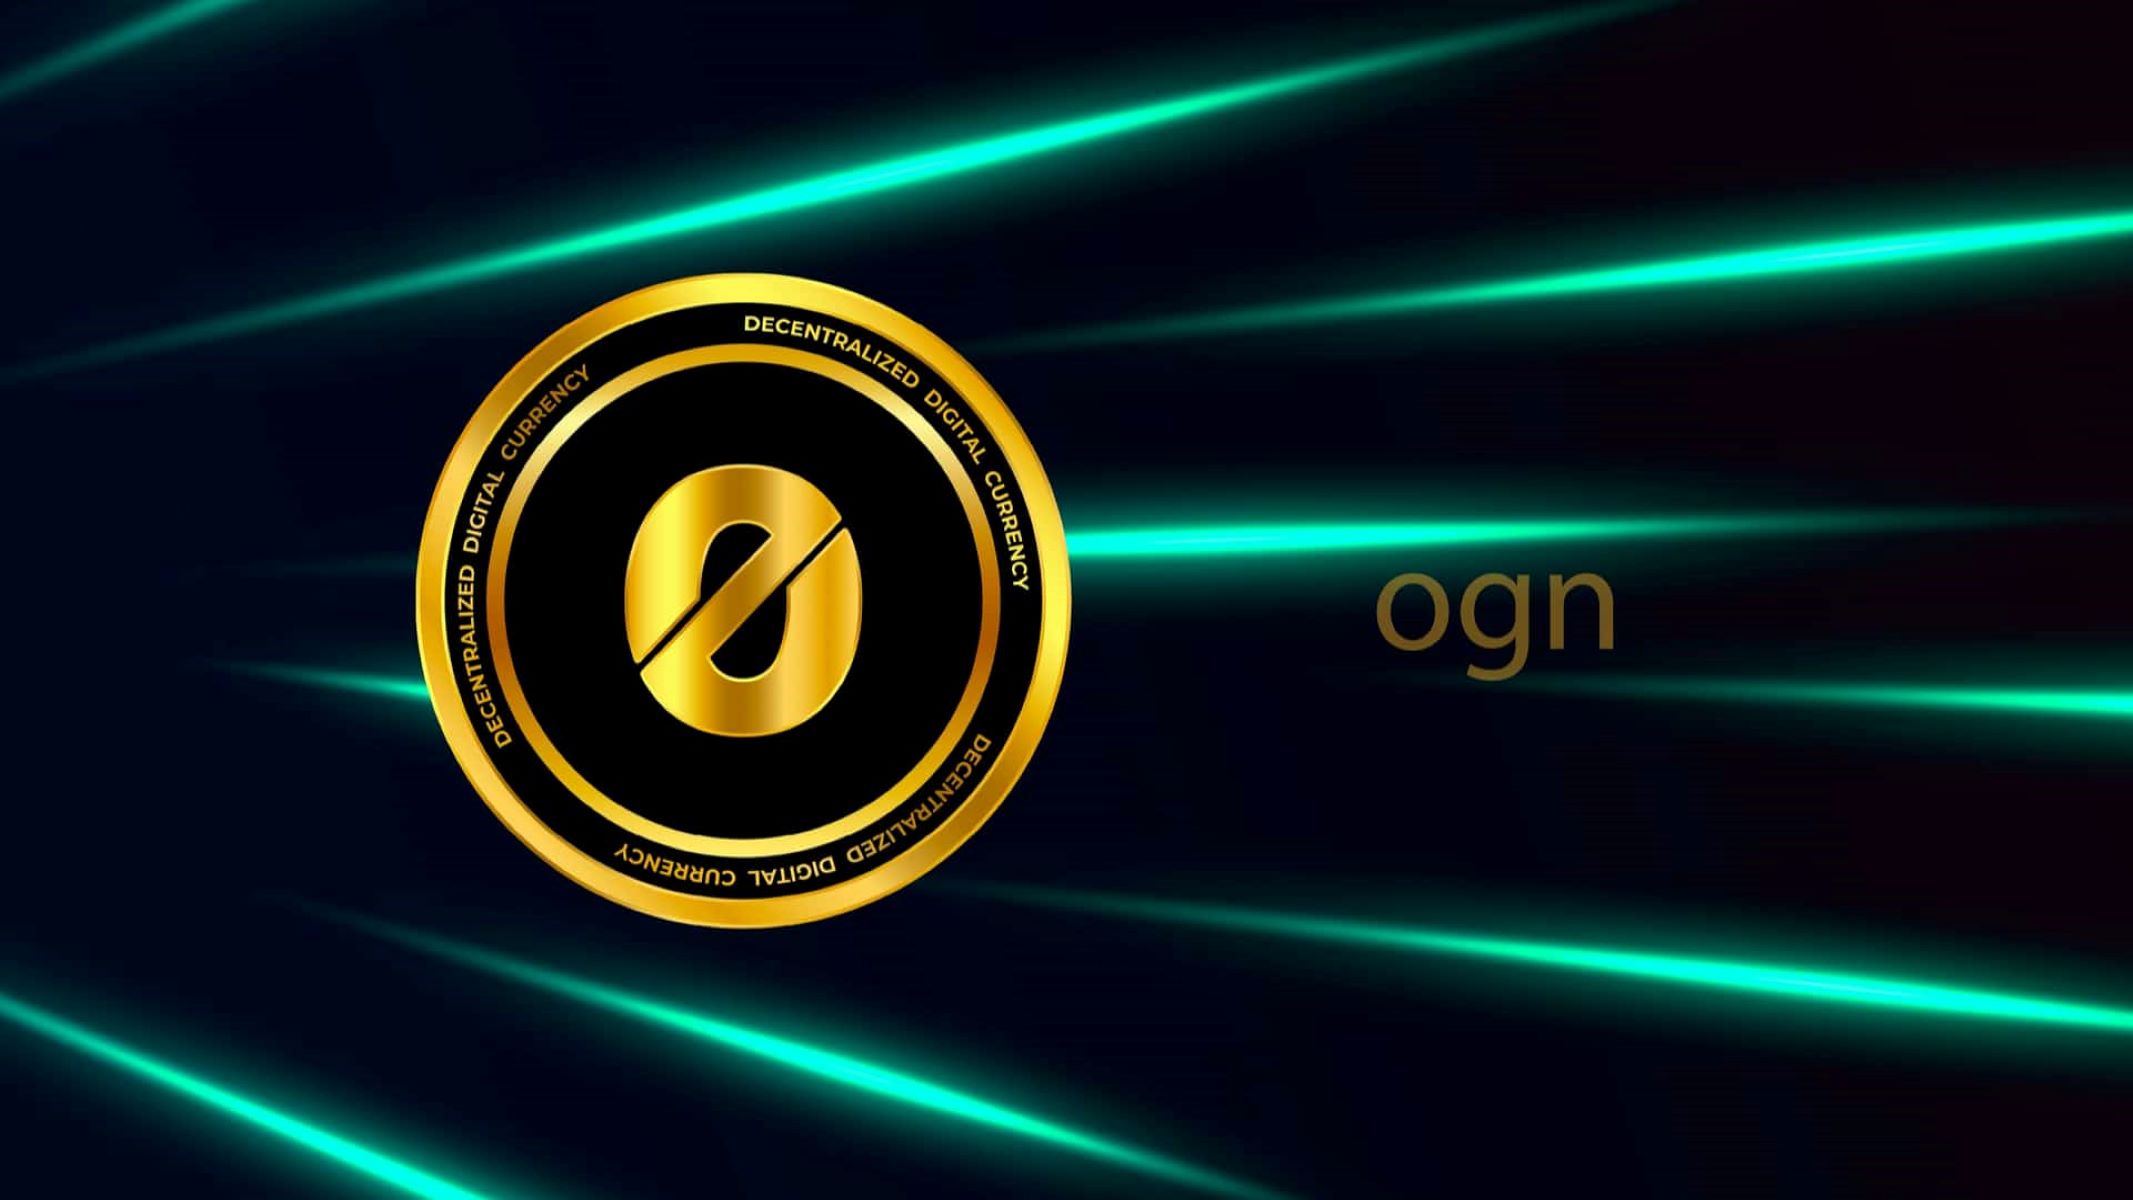 20-astounding-facts-about-origin-protocol-ogn